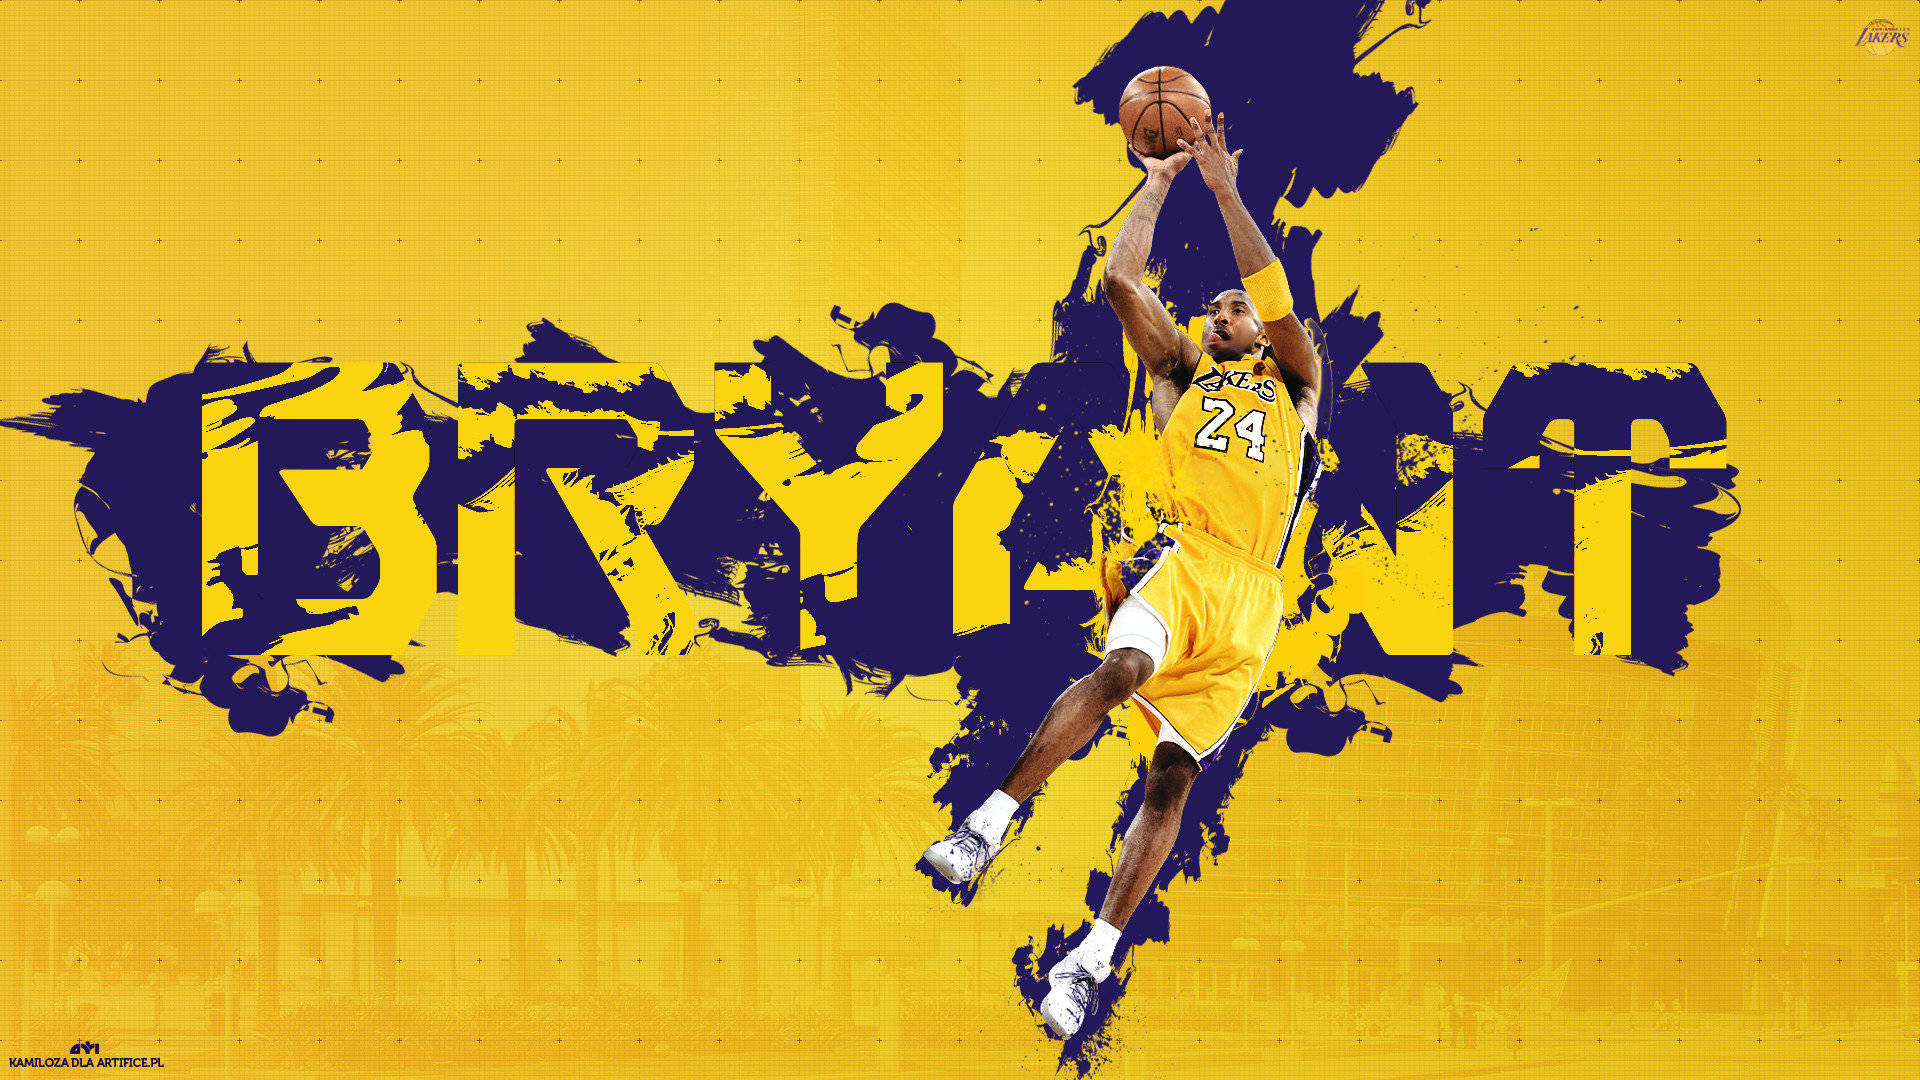 NBA Legend Kobe Bryant in an iconic purple and yellow jersey Wallpaper